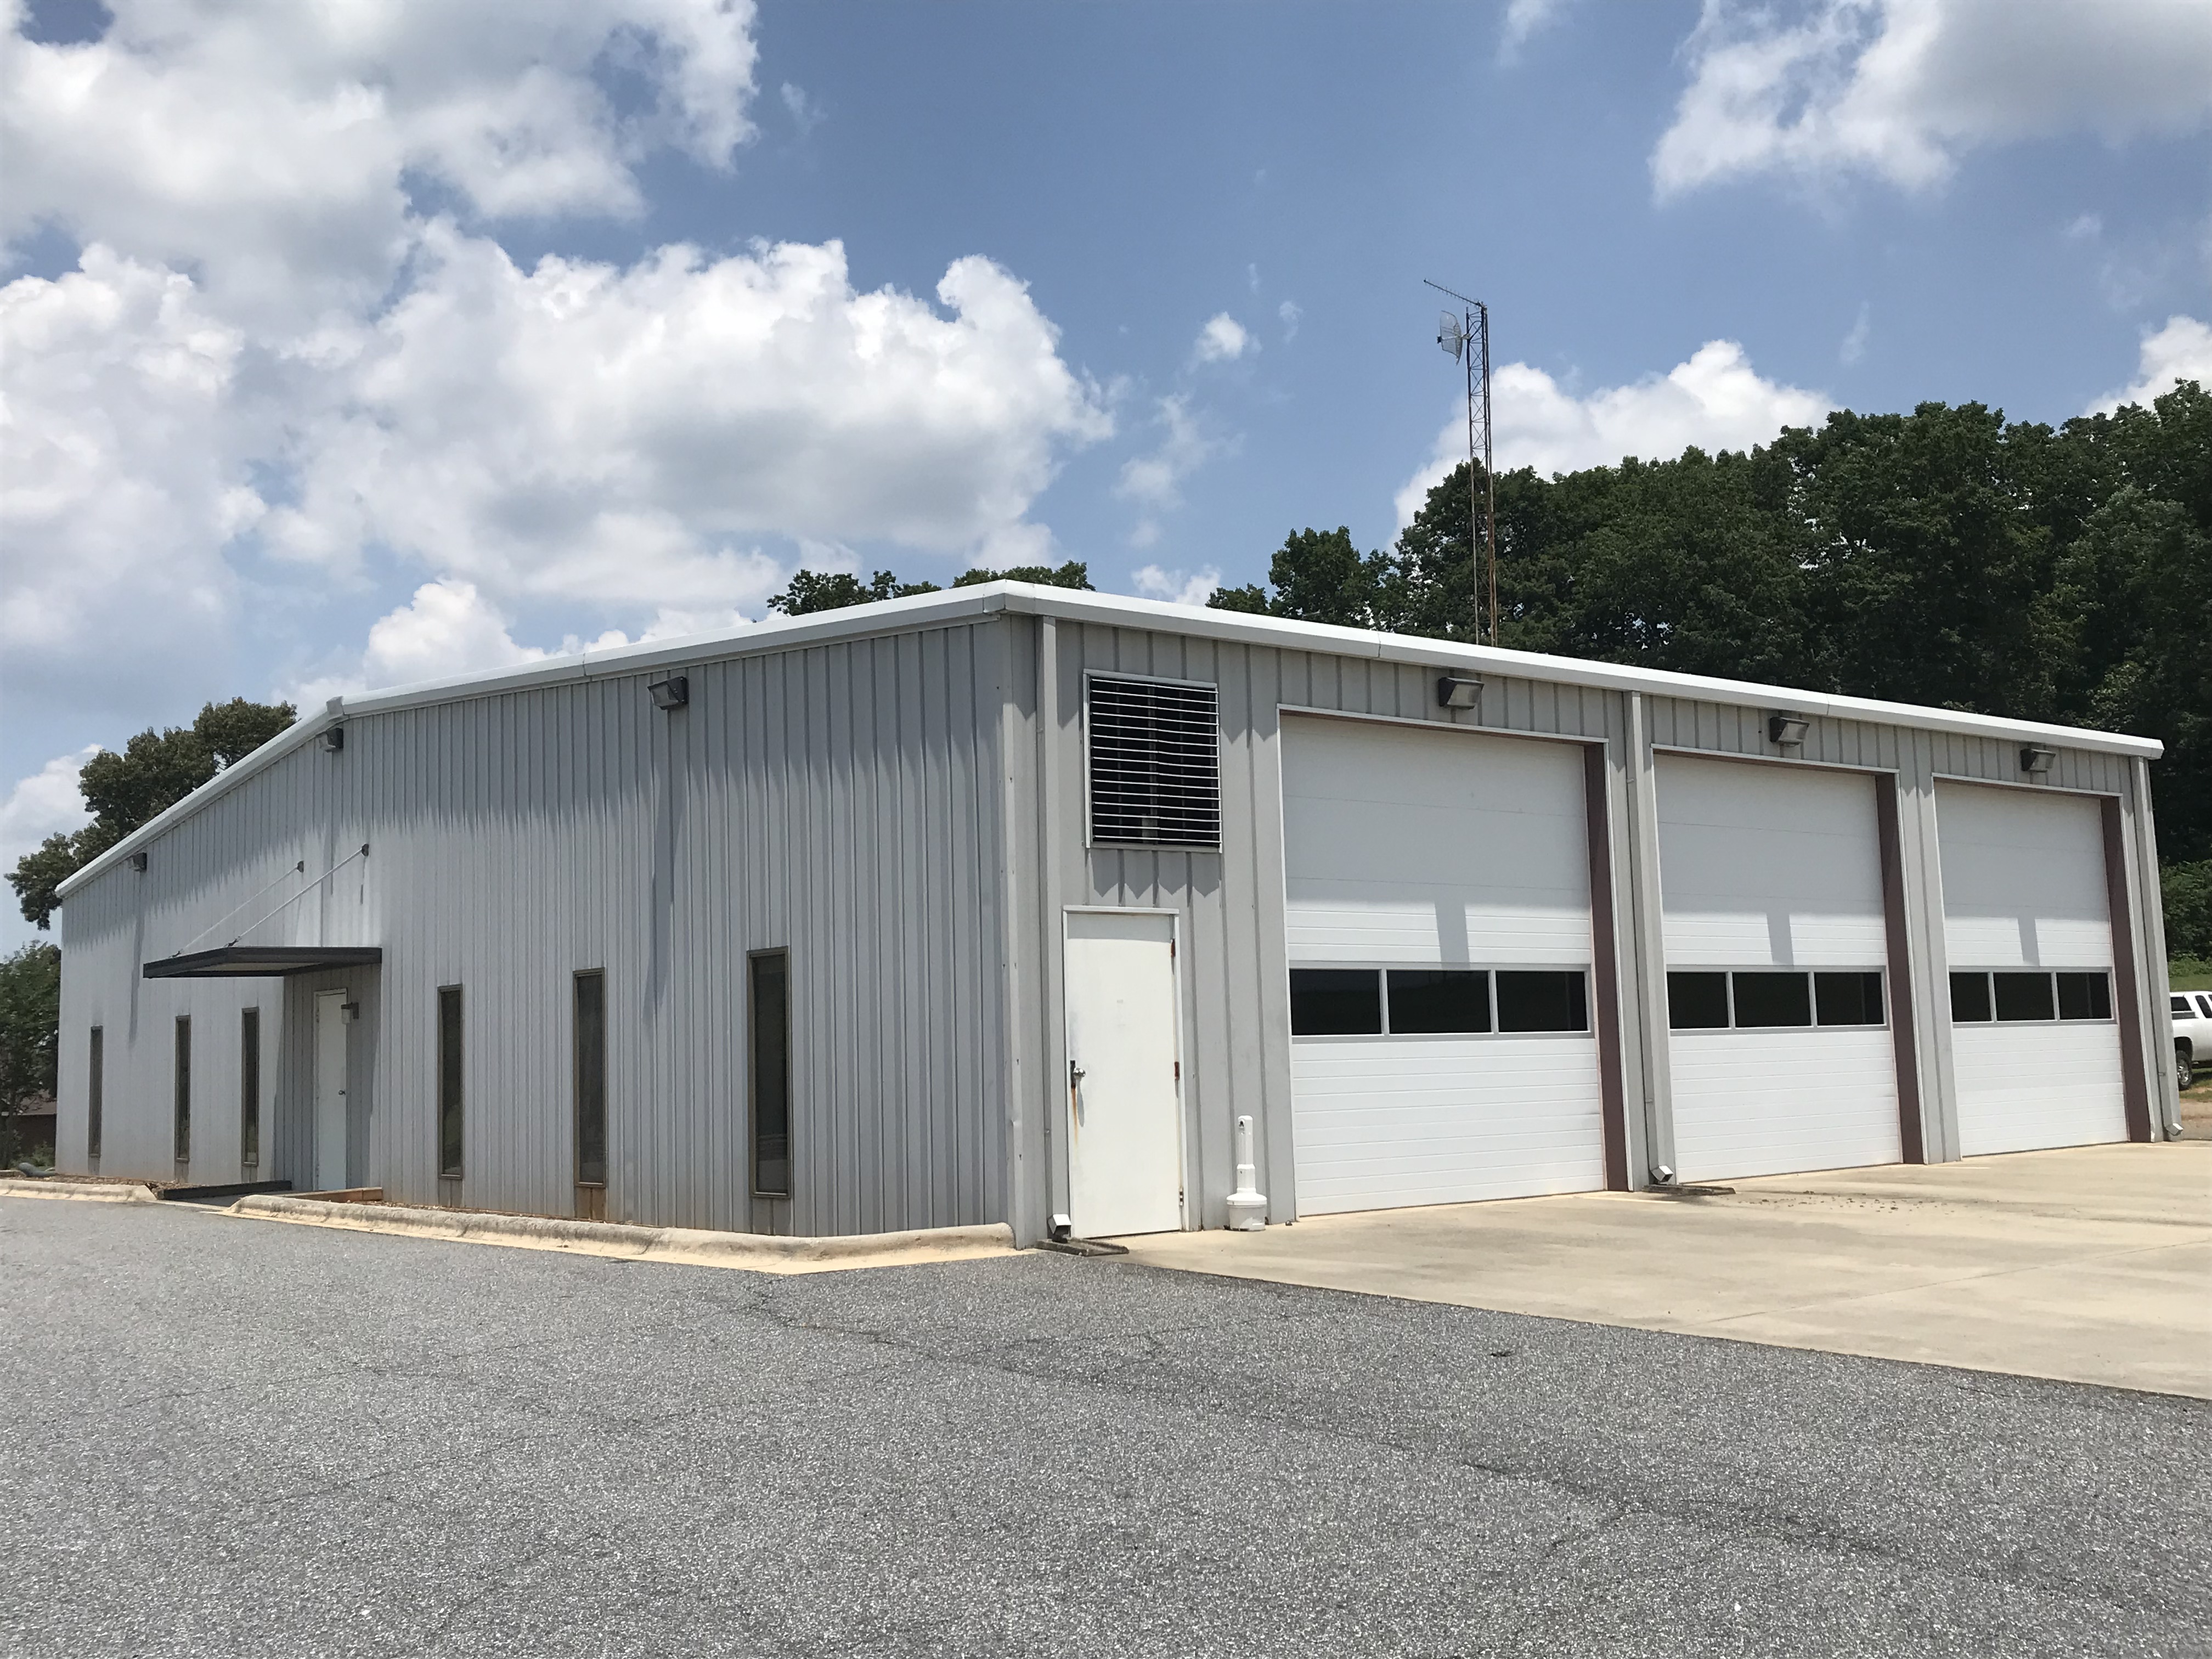 Image result for cool springs fire department station 2